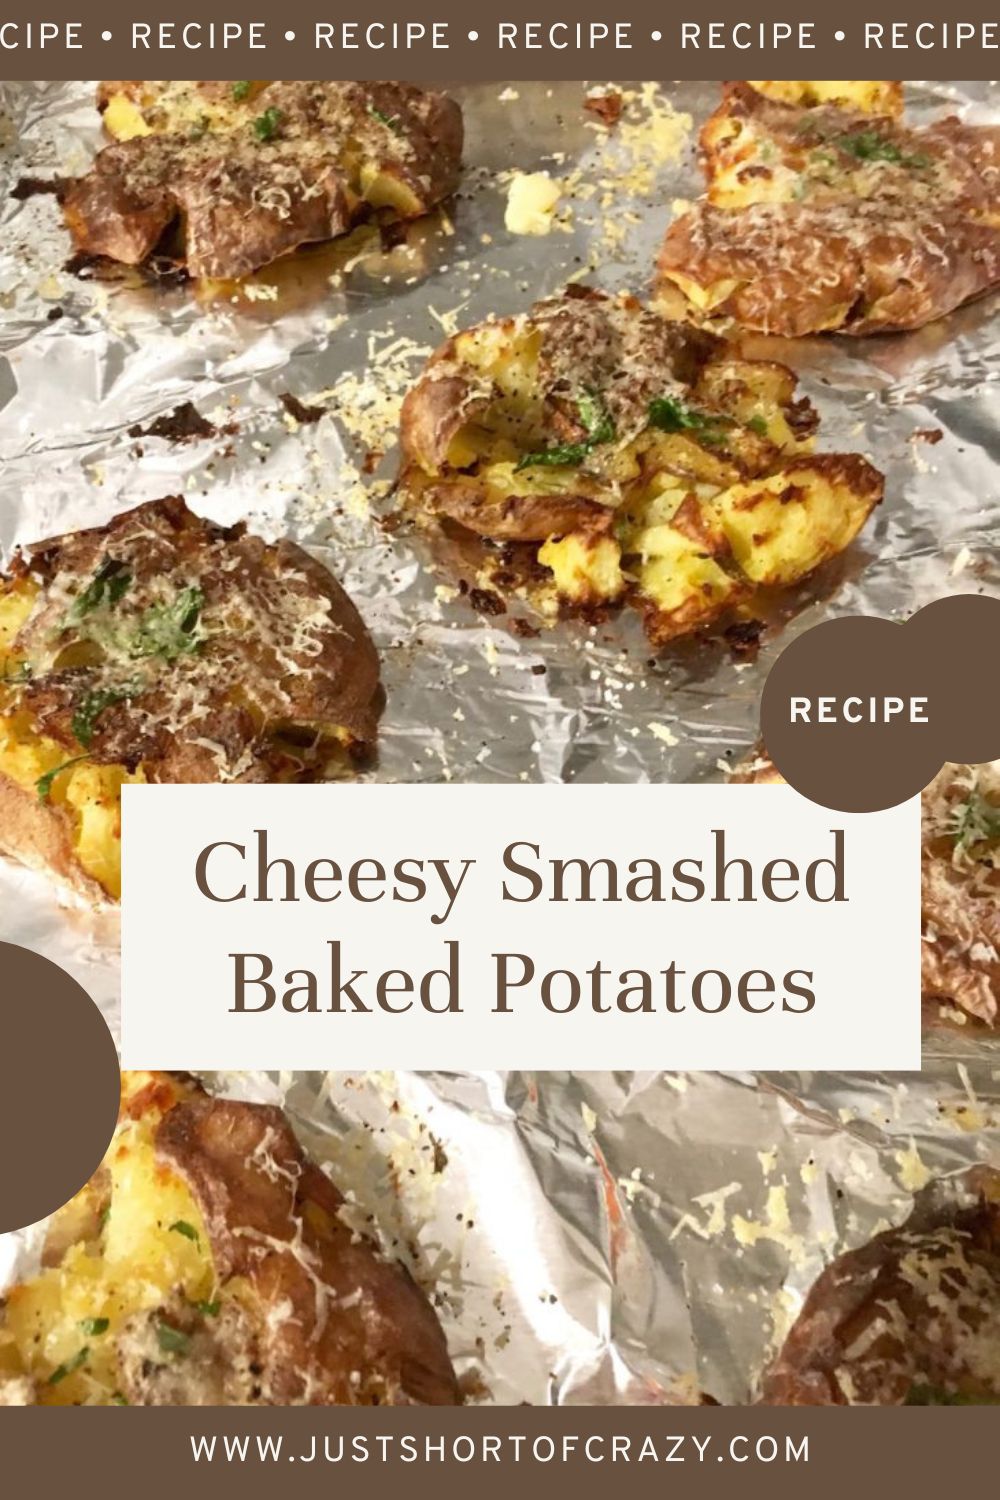 Pin for Pinterest for the cheesy smashed baked potatoes.